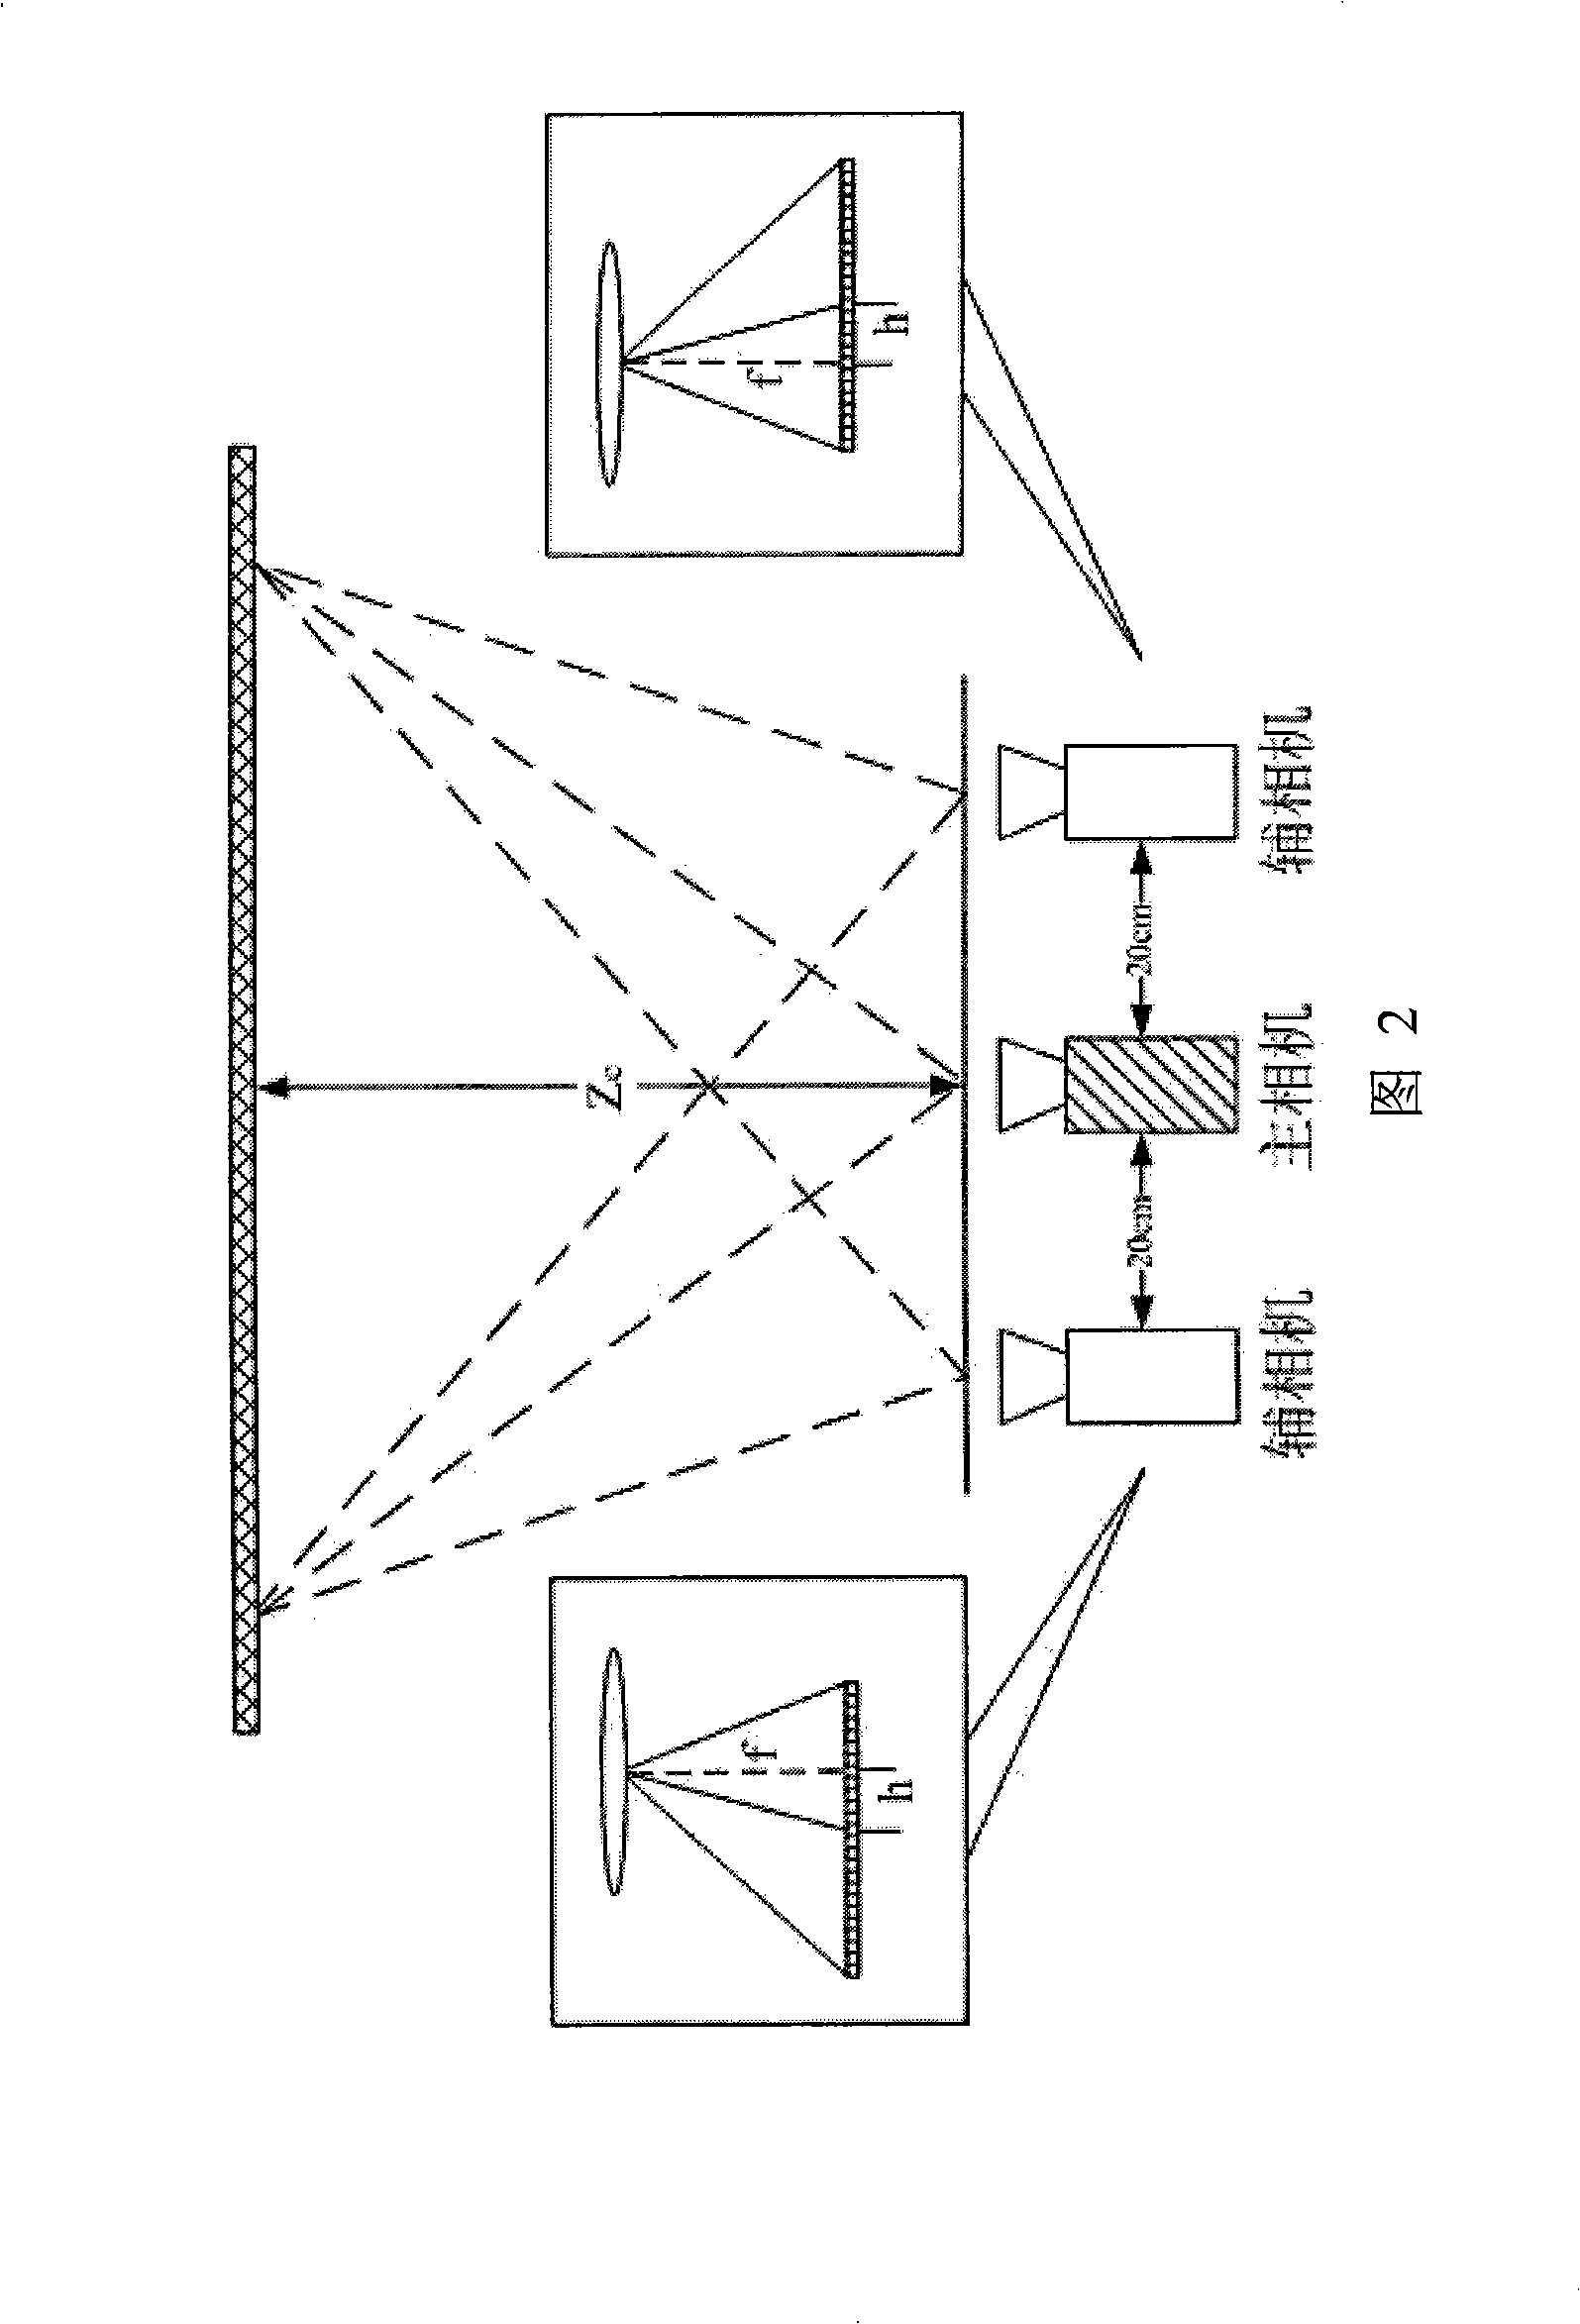 Natural three-dimensional television system